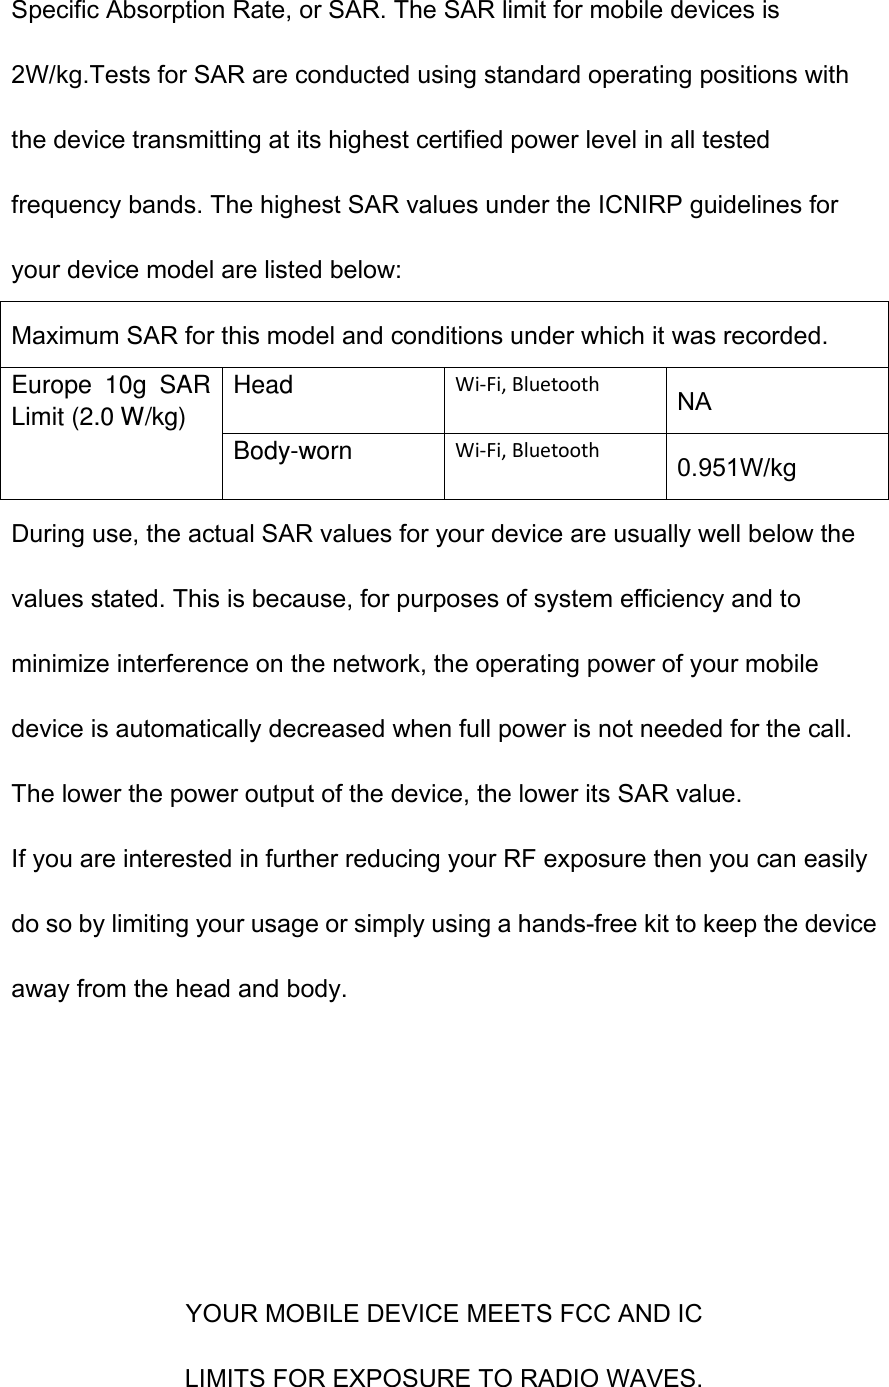 Specific Absorption Rate, or SAR. The SAR limit for mobile devices is 2W/kg.Tests for SAR are conducted using standard operating positions with the device transmitting at its highest certified power level in all tested frequency bands. The highest SAR values under the ICNIRP guidelines for your device model are listed below: Maximum SAR for this model and conditions under which it was recorded. Europe  10g  SAR Limit (2.0 W/kg) Head Wi-Fi, Bluetooth NA Body-worn Wi-Fi, Bluetooth 0.951W/kg During use, the actual SAR values for your device are usually well below the values stated. This is because, for purposes of system efficiency and to minimize interference on the network, the operating power of your mobile device is automatically decreased when full power is not needed for the call. The lower the power output of the device, the lower its SAR value. If you are interested in further reducing your RF exposure then you can easily do so by limiting your usage or simply using a hands-free kit to keep the device away from the head and body.     YOUR MOBILE DEVICE MEETS FCC AND IC LIMITS FOR EXPOSURE TO RADIO WAVES. 